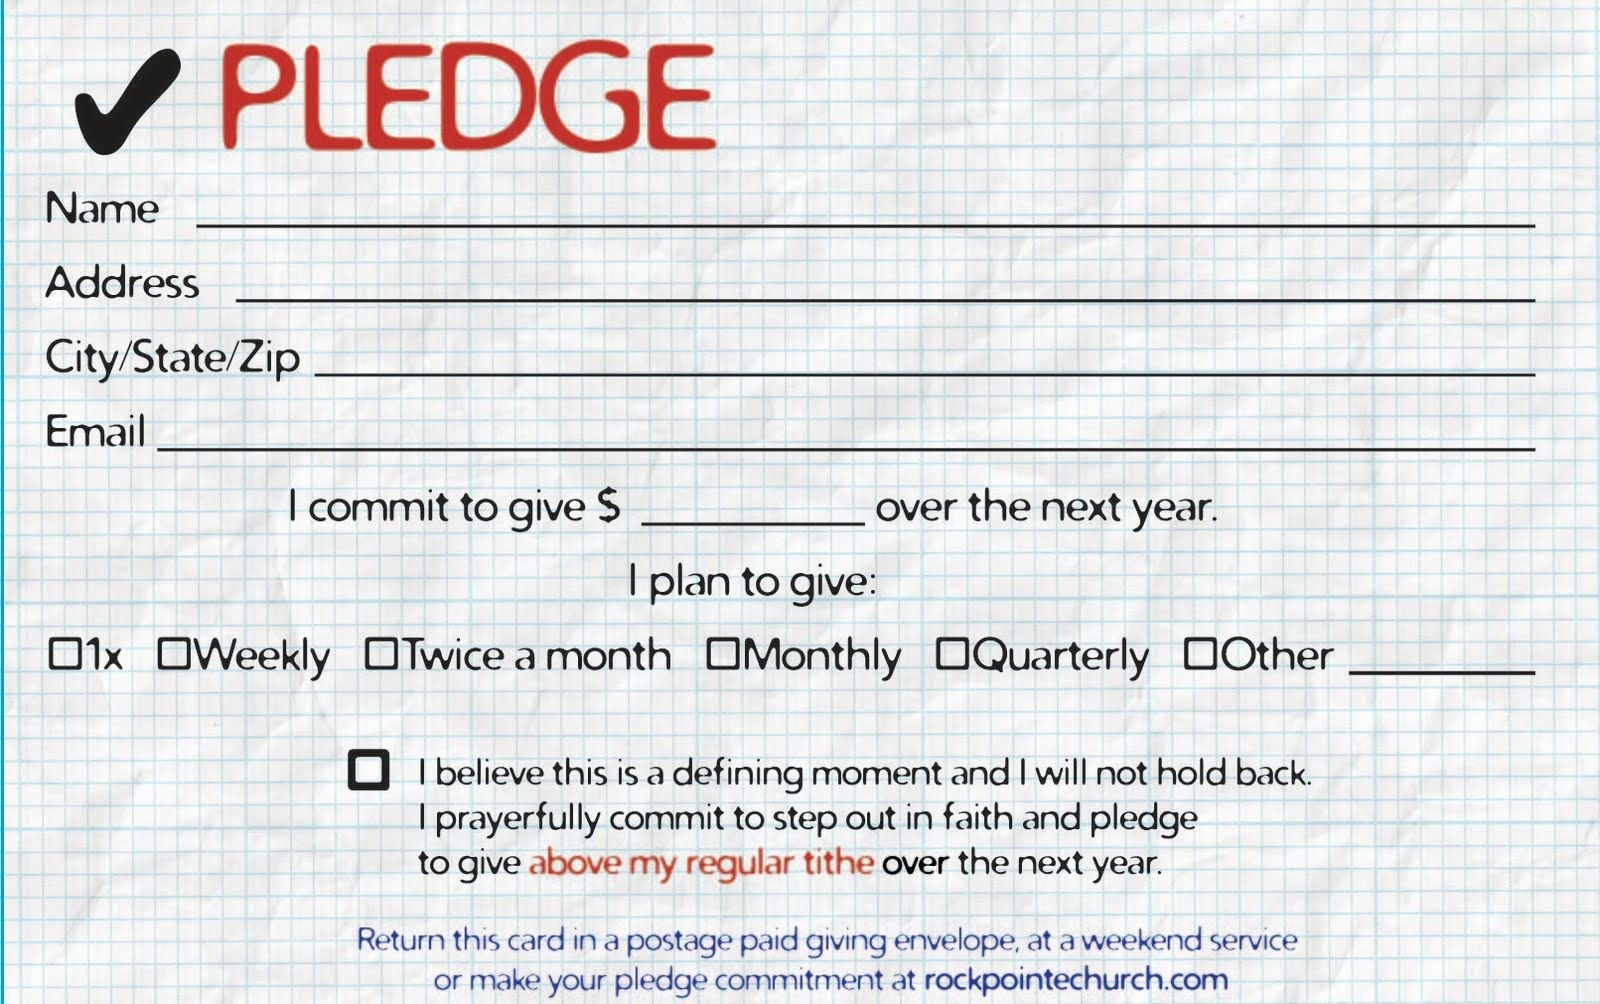 Pledge Cards For Churches  Pledge Card Templates  My Stuff pertaining to Fundraising Pledge Card Template